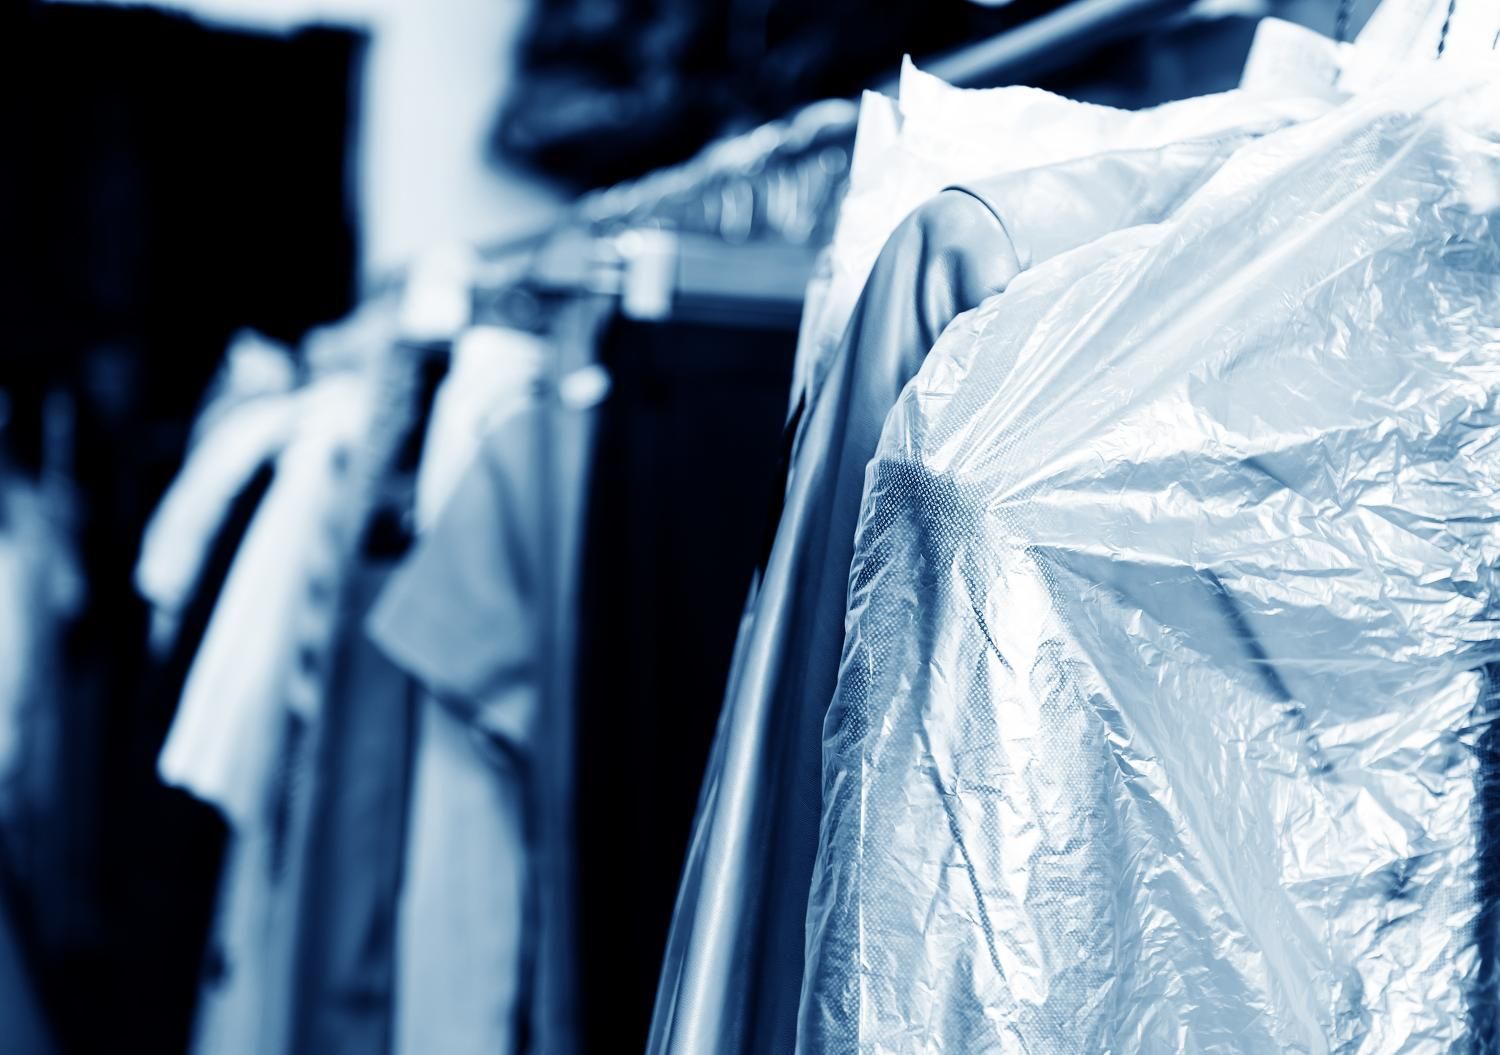 a row of clothes hanging on a rack wrapped in plastic bags